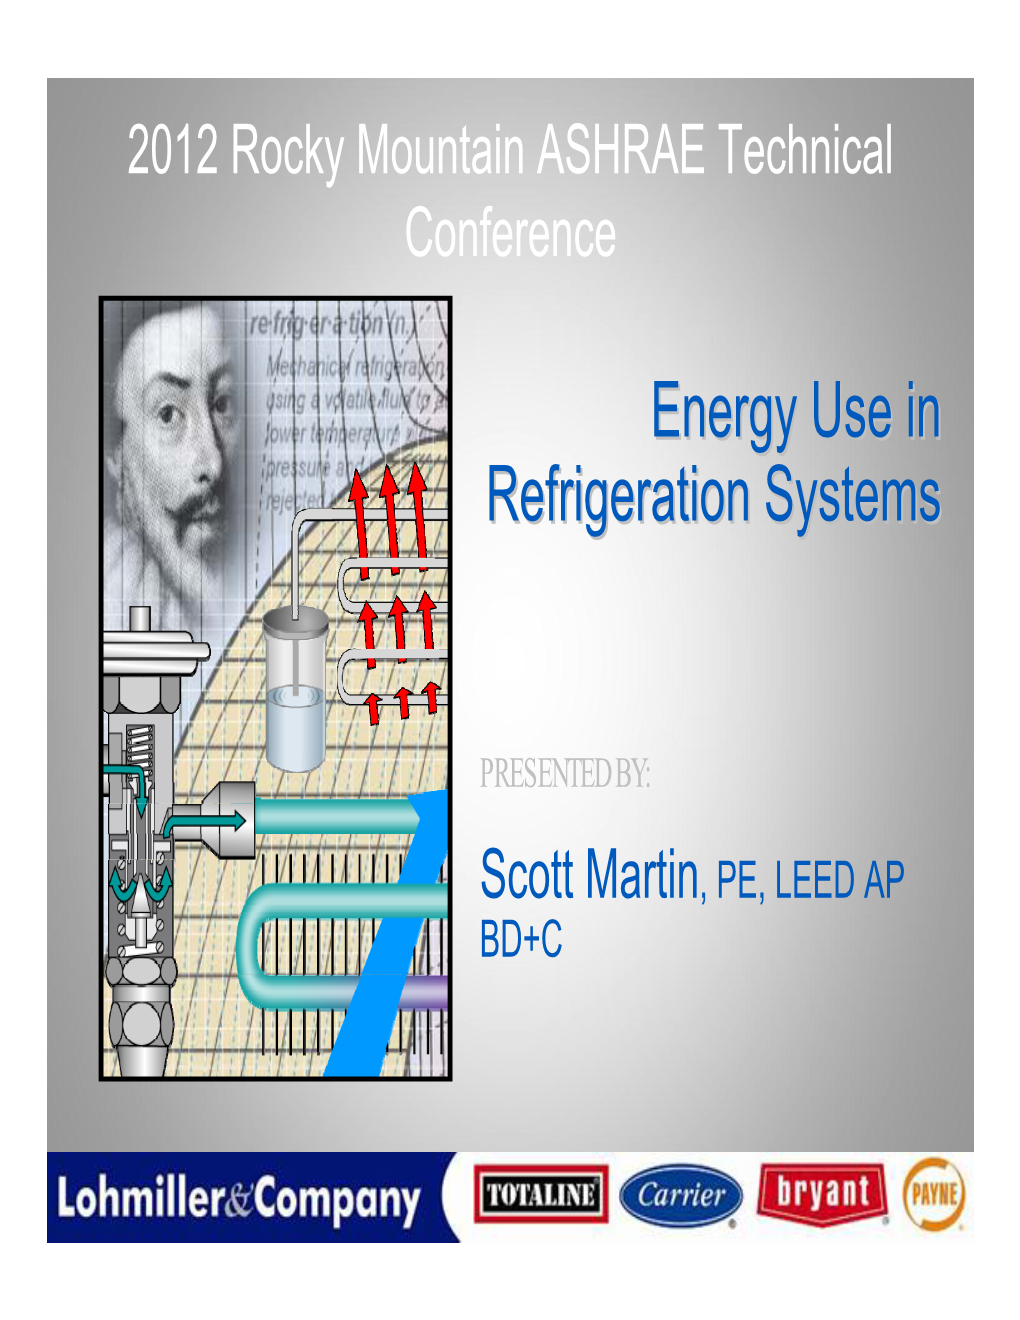 Energy Use in Refrigeration Systems